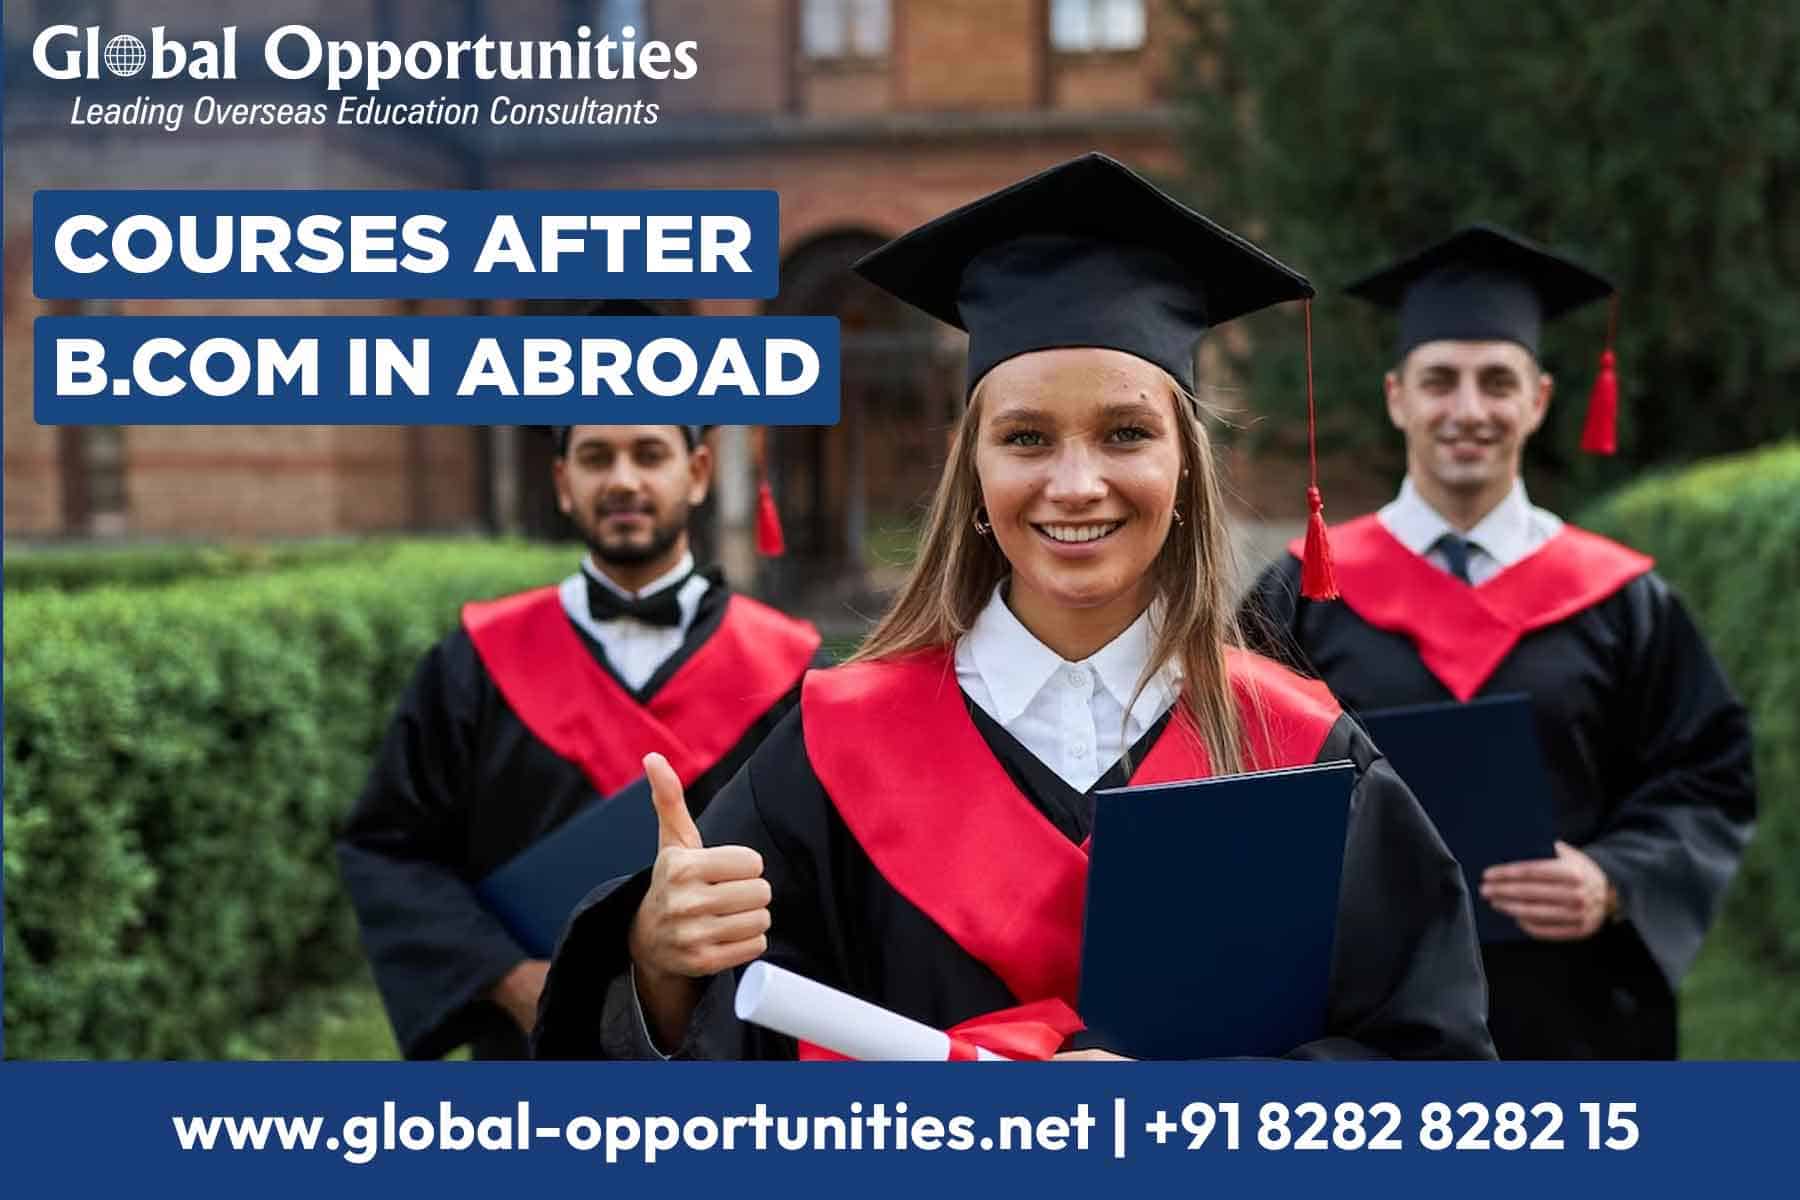 Courses After B.Com in Abroad